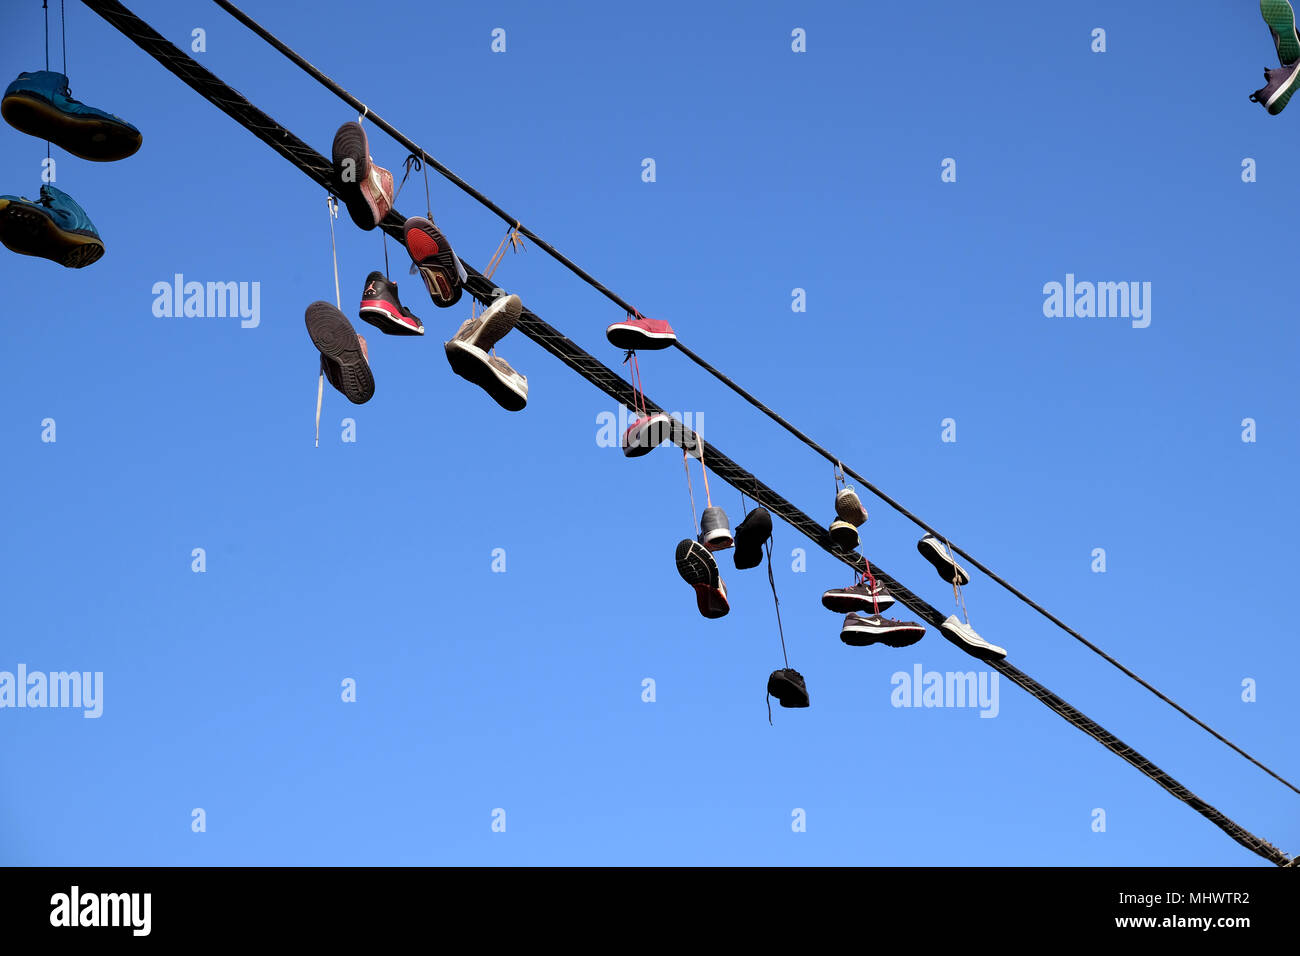 Why do people in the USA throw their old shoes into the power lines? - Quora